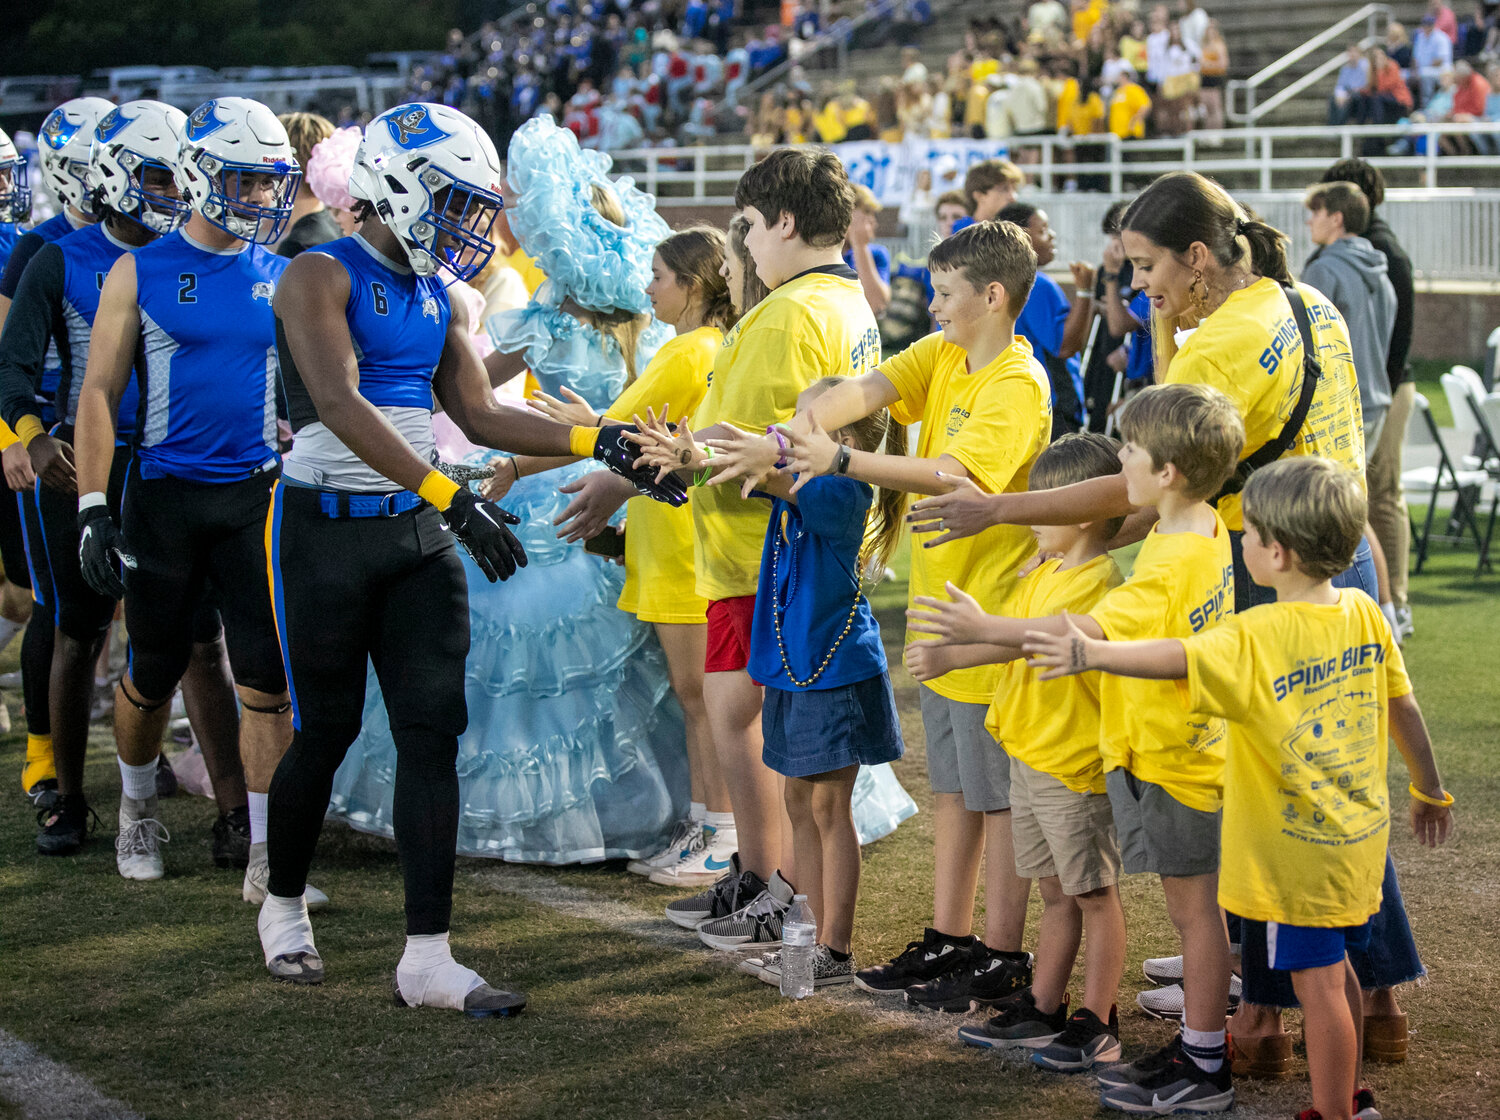 Desmond Thomas, Dallas Boothe and the Fairhope Pirates greet attendees of the 10th-annual Spina Bifida Awareness Game on Friday, Oct. 13, at Fairhope Municipal Stadium. After the tailgate during pregame warmups, the groups met for a handshake before the Pirates took on the Daphne Trojans.